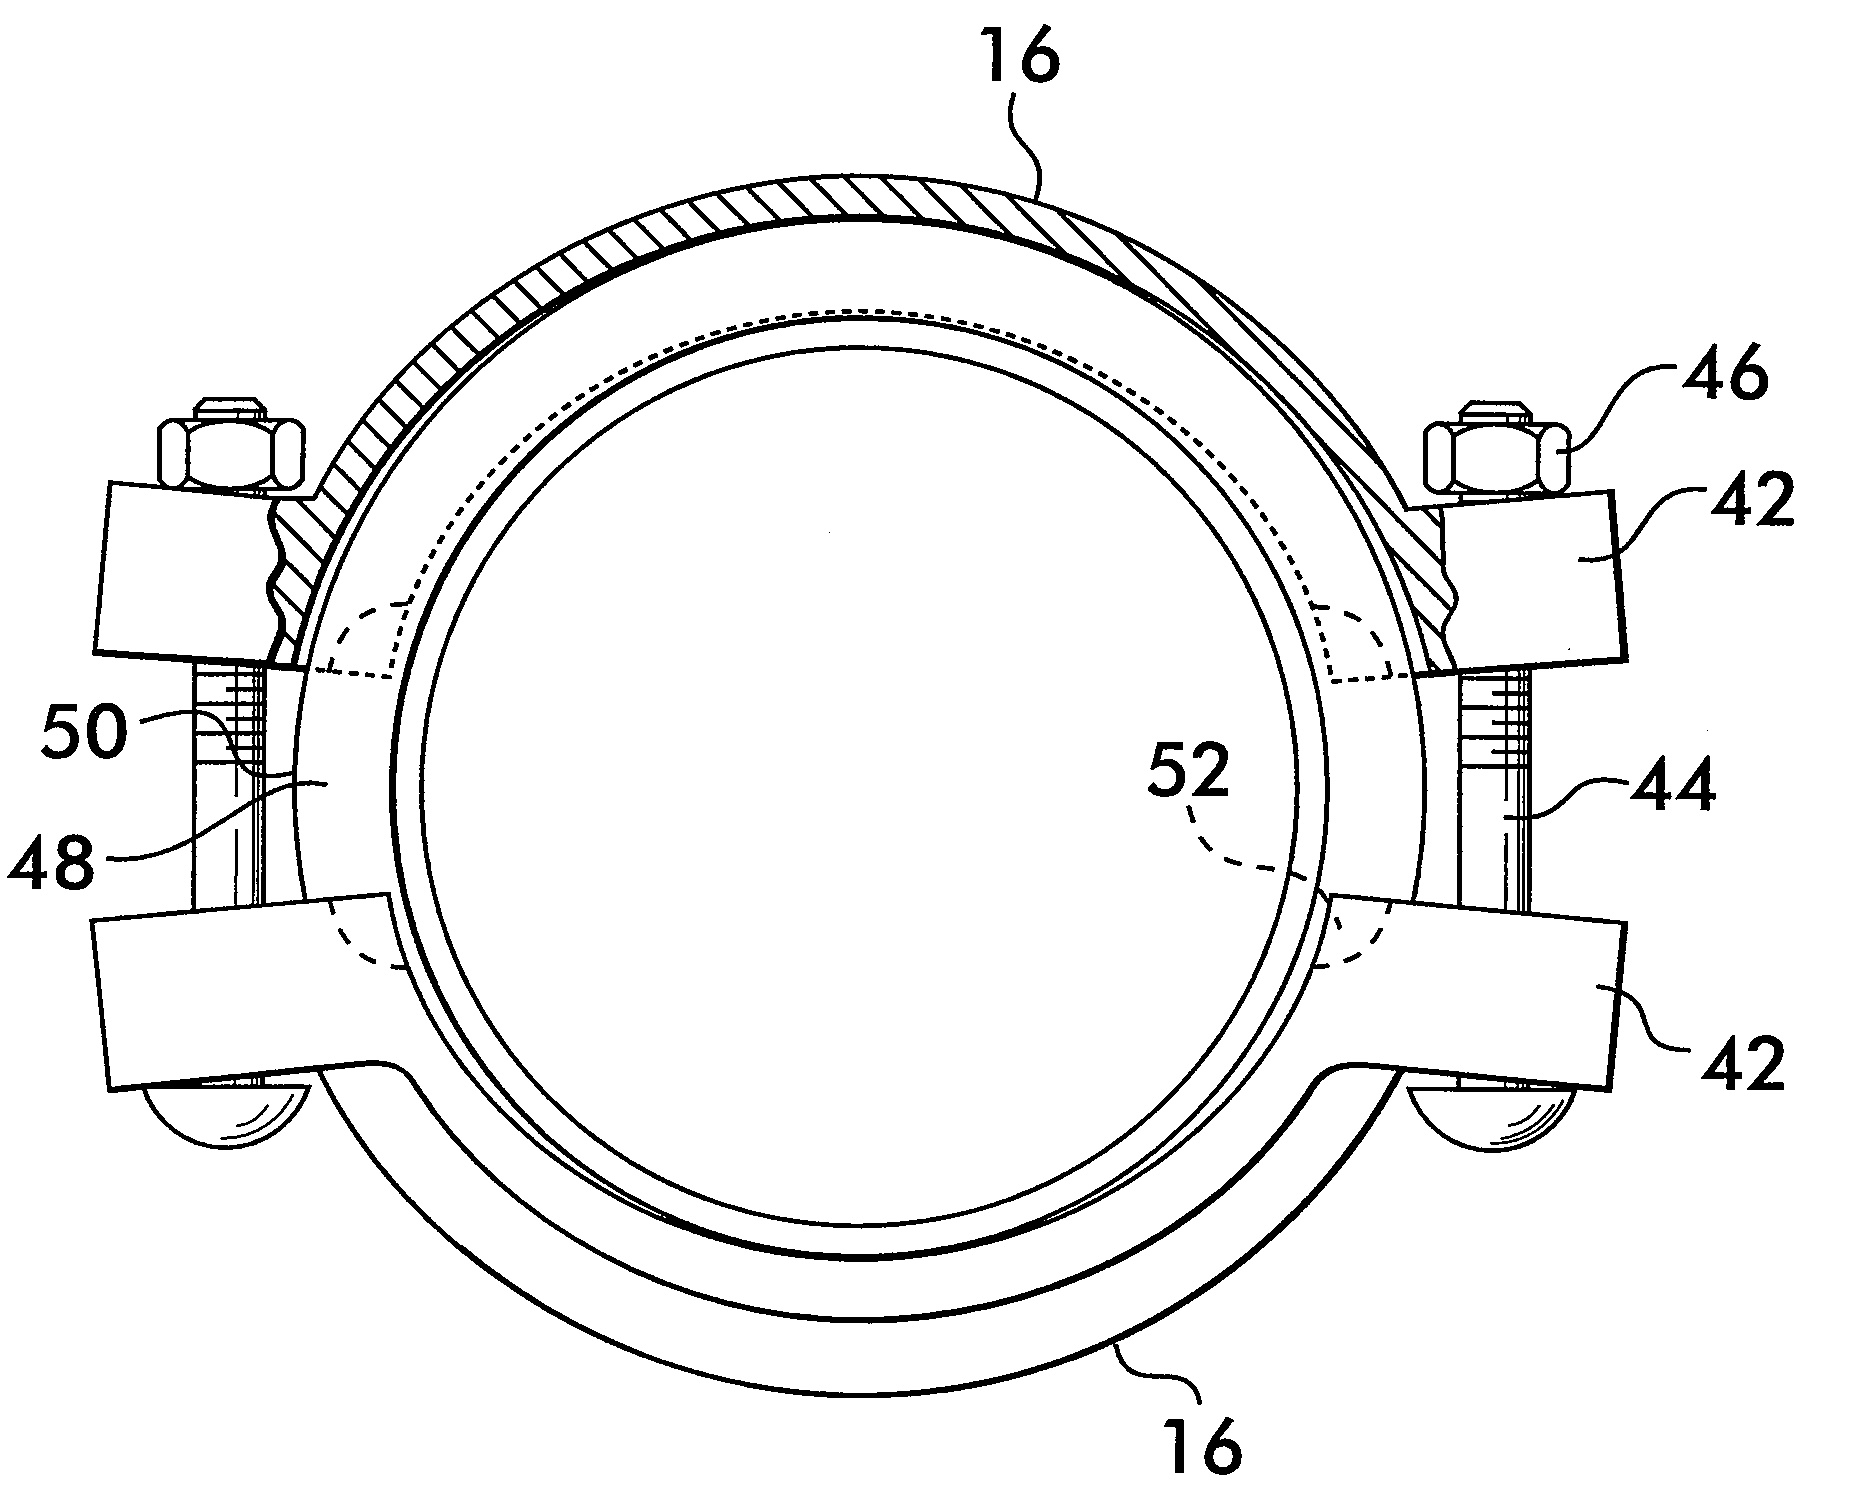 Installation-ready pipe coupling method of manufacture